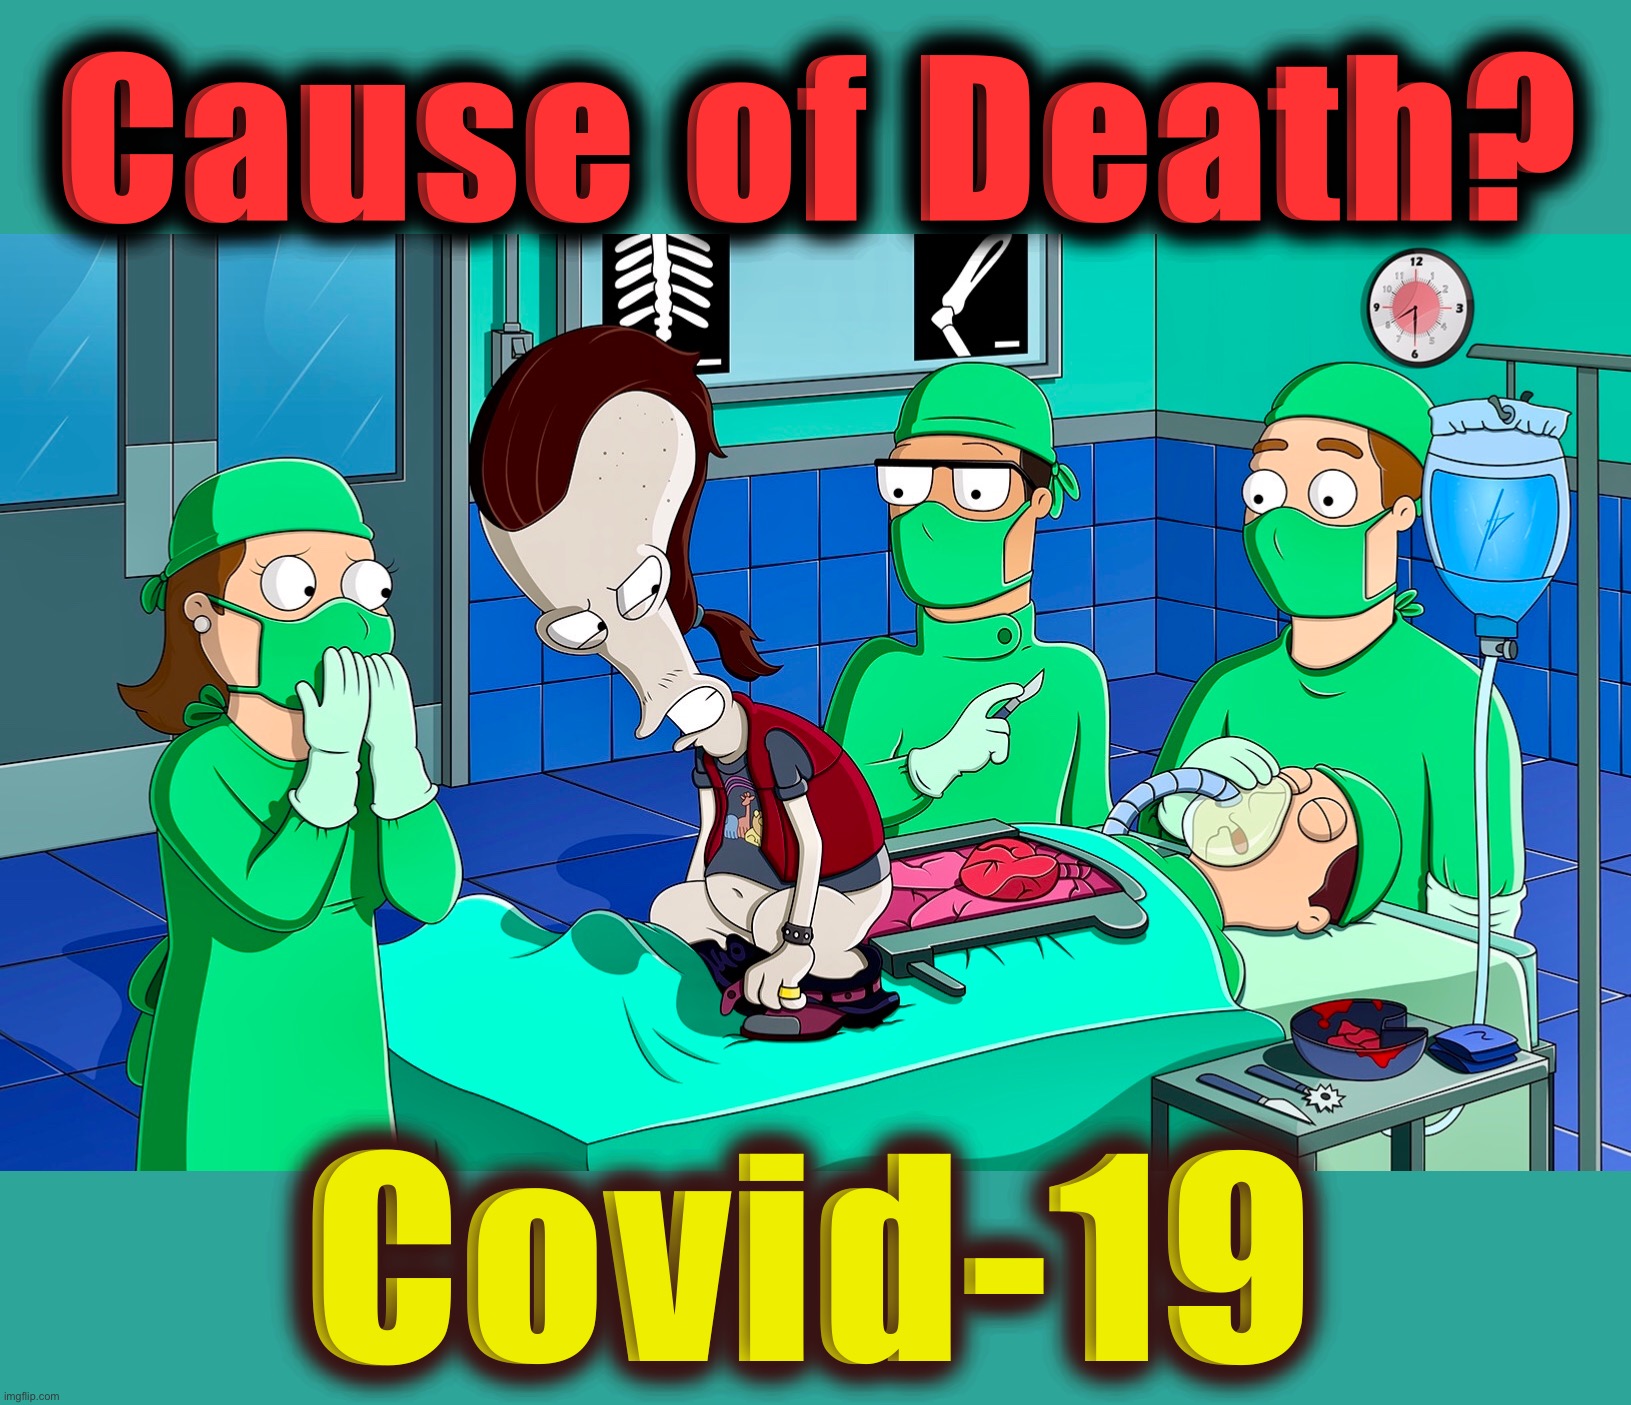 I’m not using enough hand sanitizer | Cause of Death? Covid-19 | image tagged in social distancing,memes,covid-19,coronavirus,healthcare,world war c | made w/ Imgflip meme maker